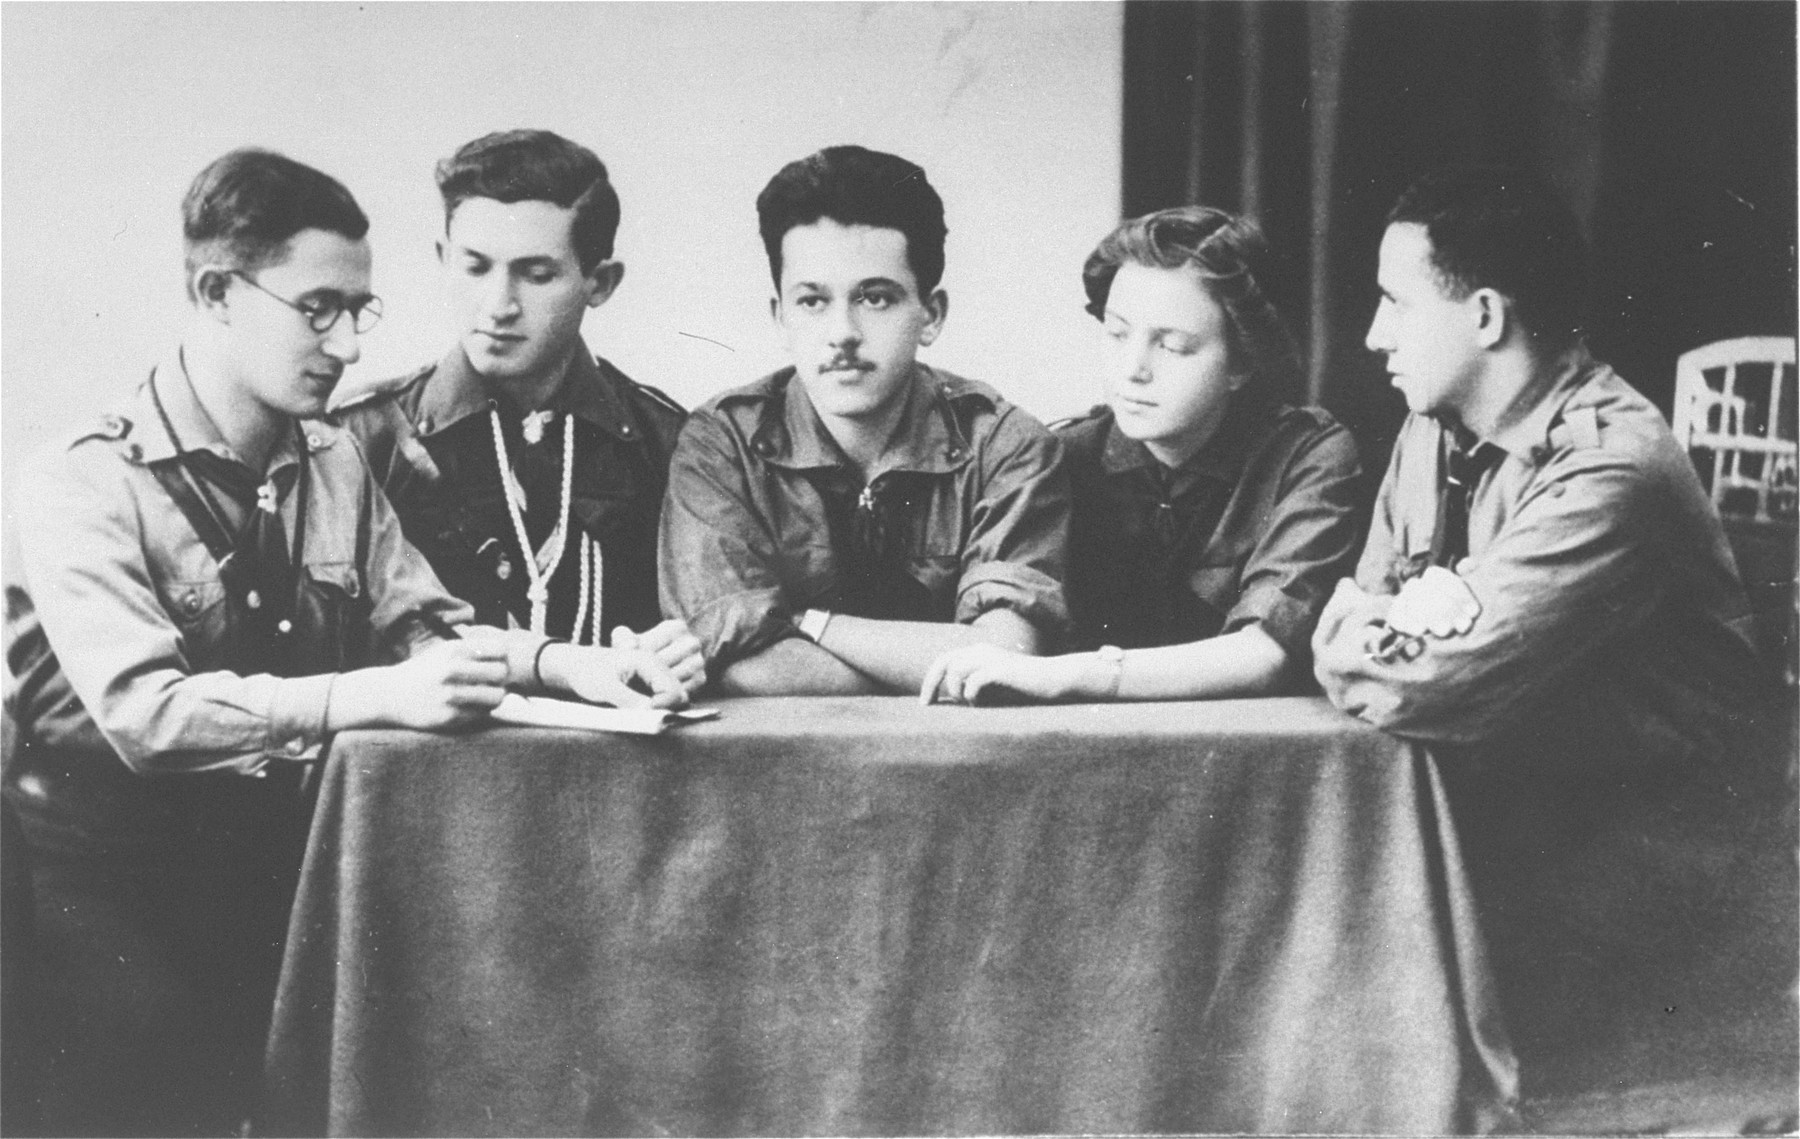 Group portrait of members of the Hanoar Hatzioni Zionist youth movement in Sosnowiec.

All were active in the Zionist underground in Sosnowiec during the German occupation.  Pictured from left to right are, Dr. Bursztyn, Josef Kozhuch, Samek Meitlis, Lola Pomeranzblum, and Benjamin Bimko (the donor's brother).  Samek and Lola were married.  All but Dr. Bursztyn were shot by the Germans during the final liquidation of the ghetto in August 1943.